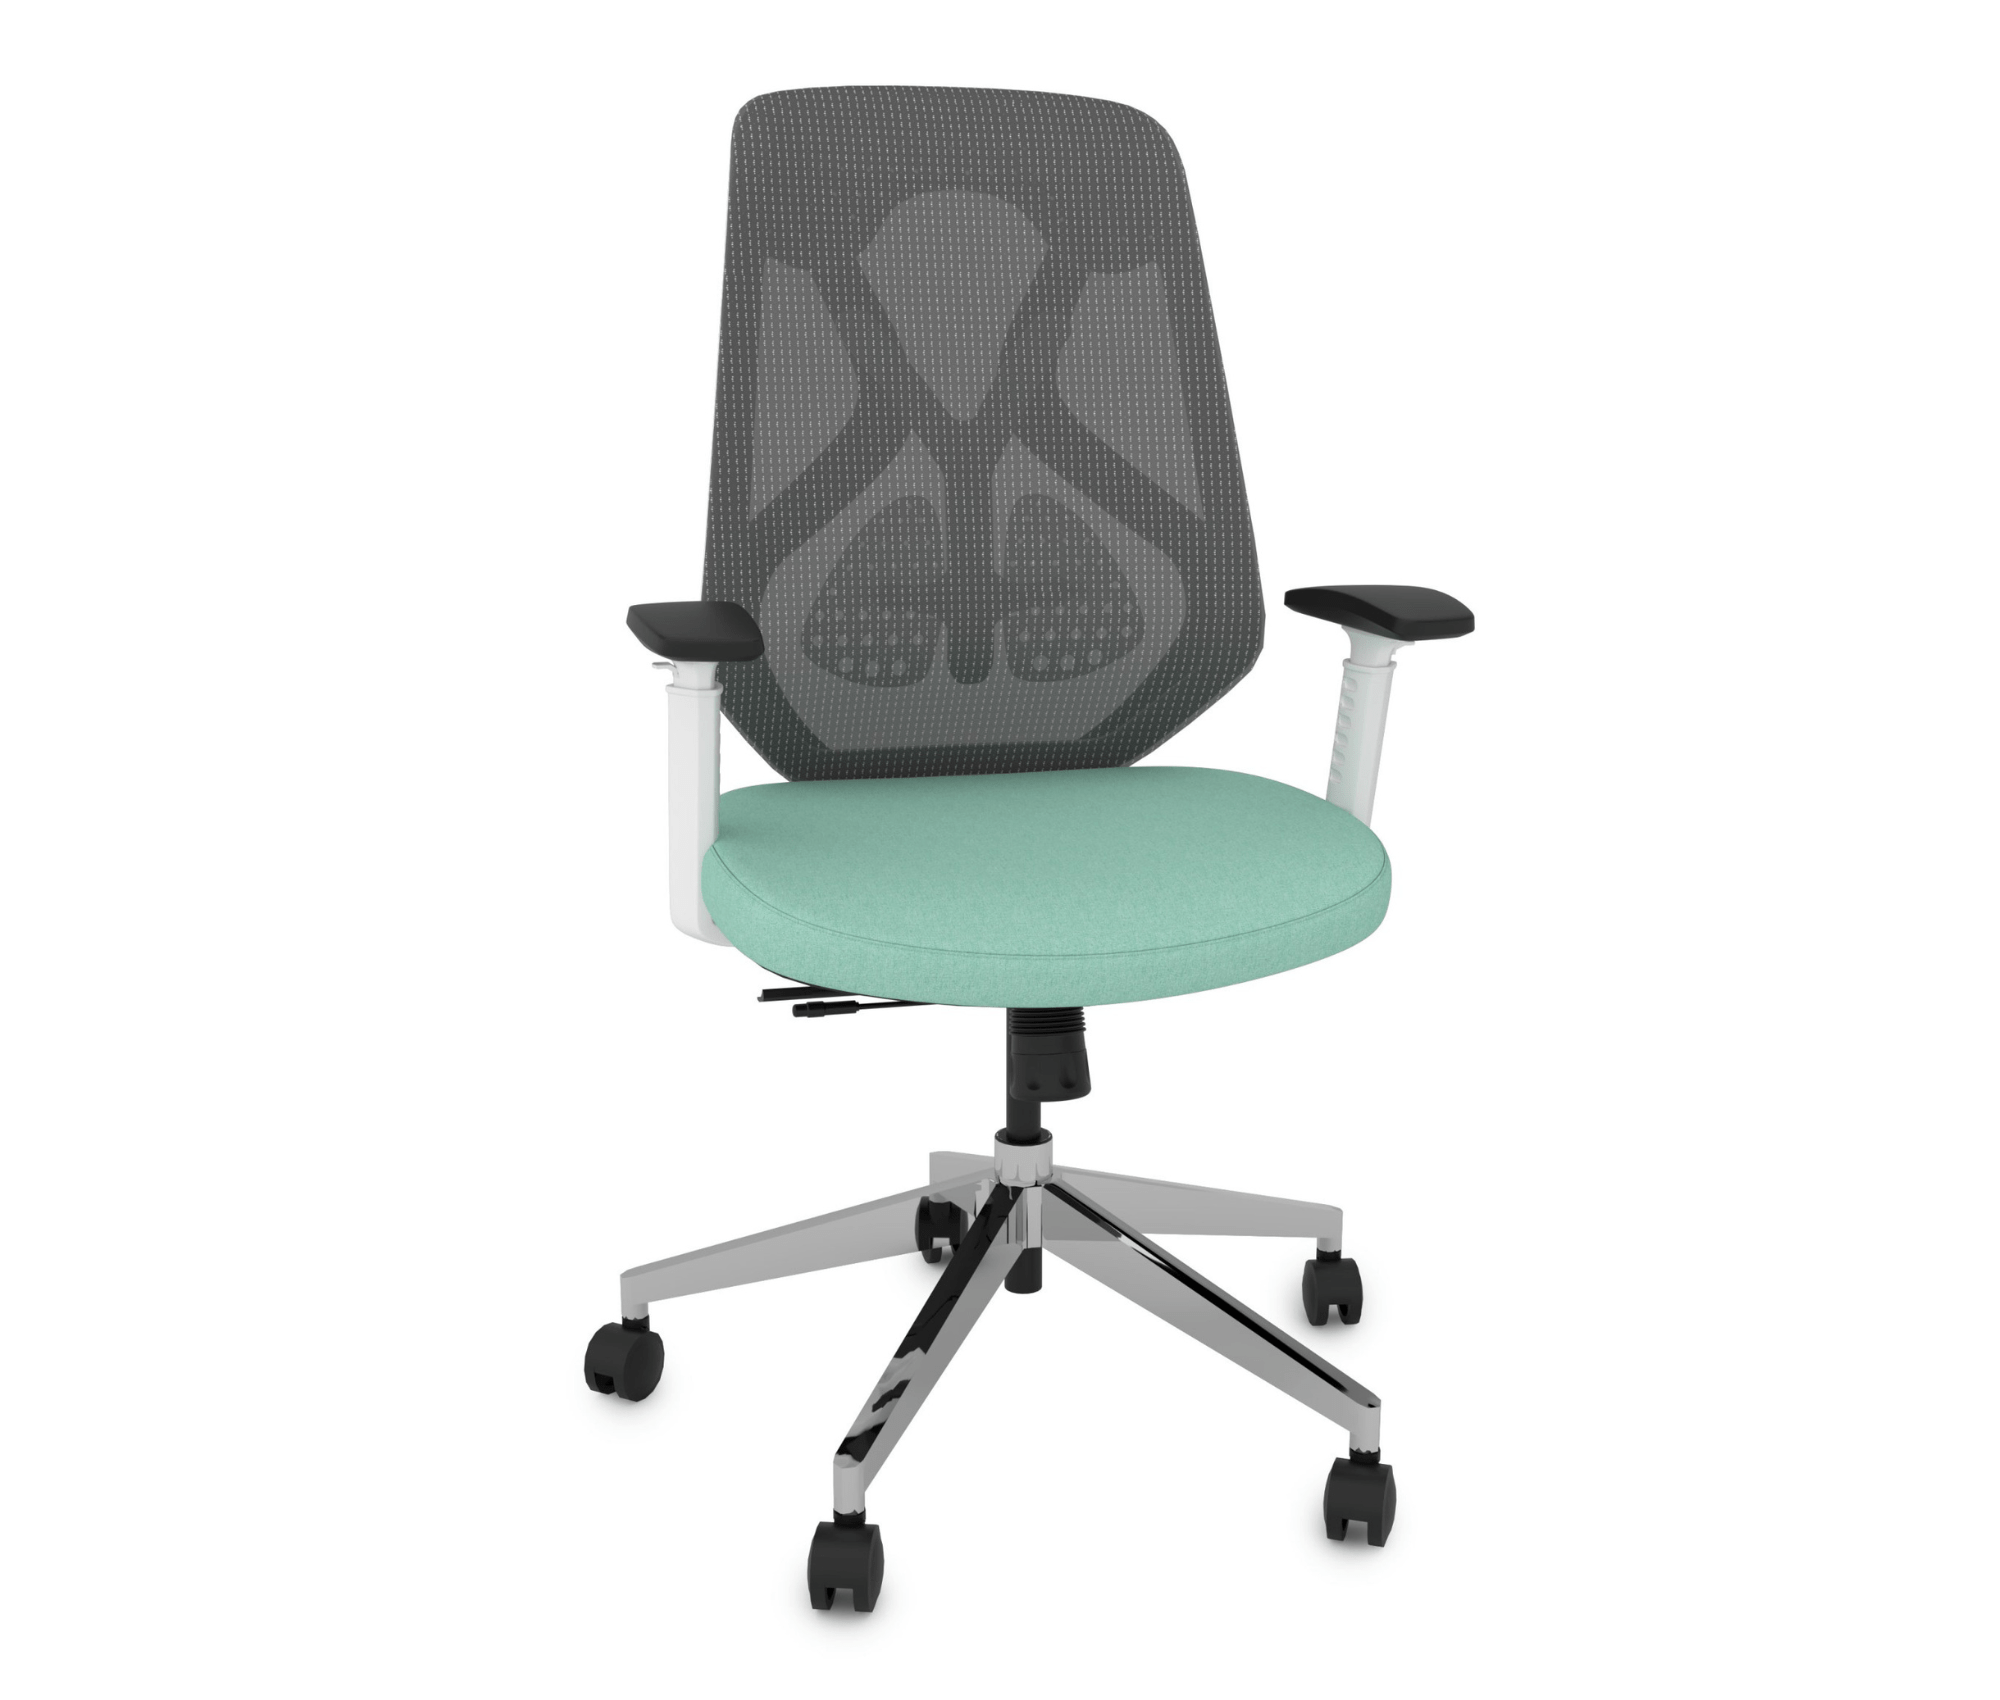 Ergonomic Plus Chair | Posture-Correcting Office Chair Porvata Office Chairs Sea Foam Green